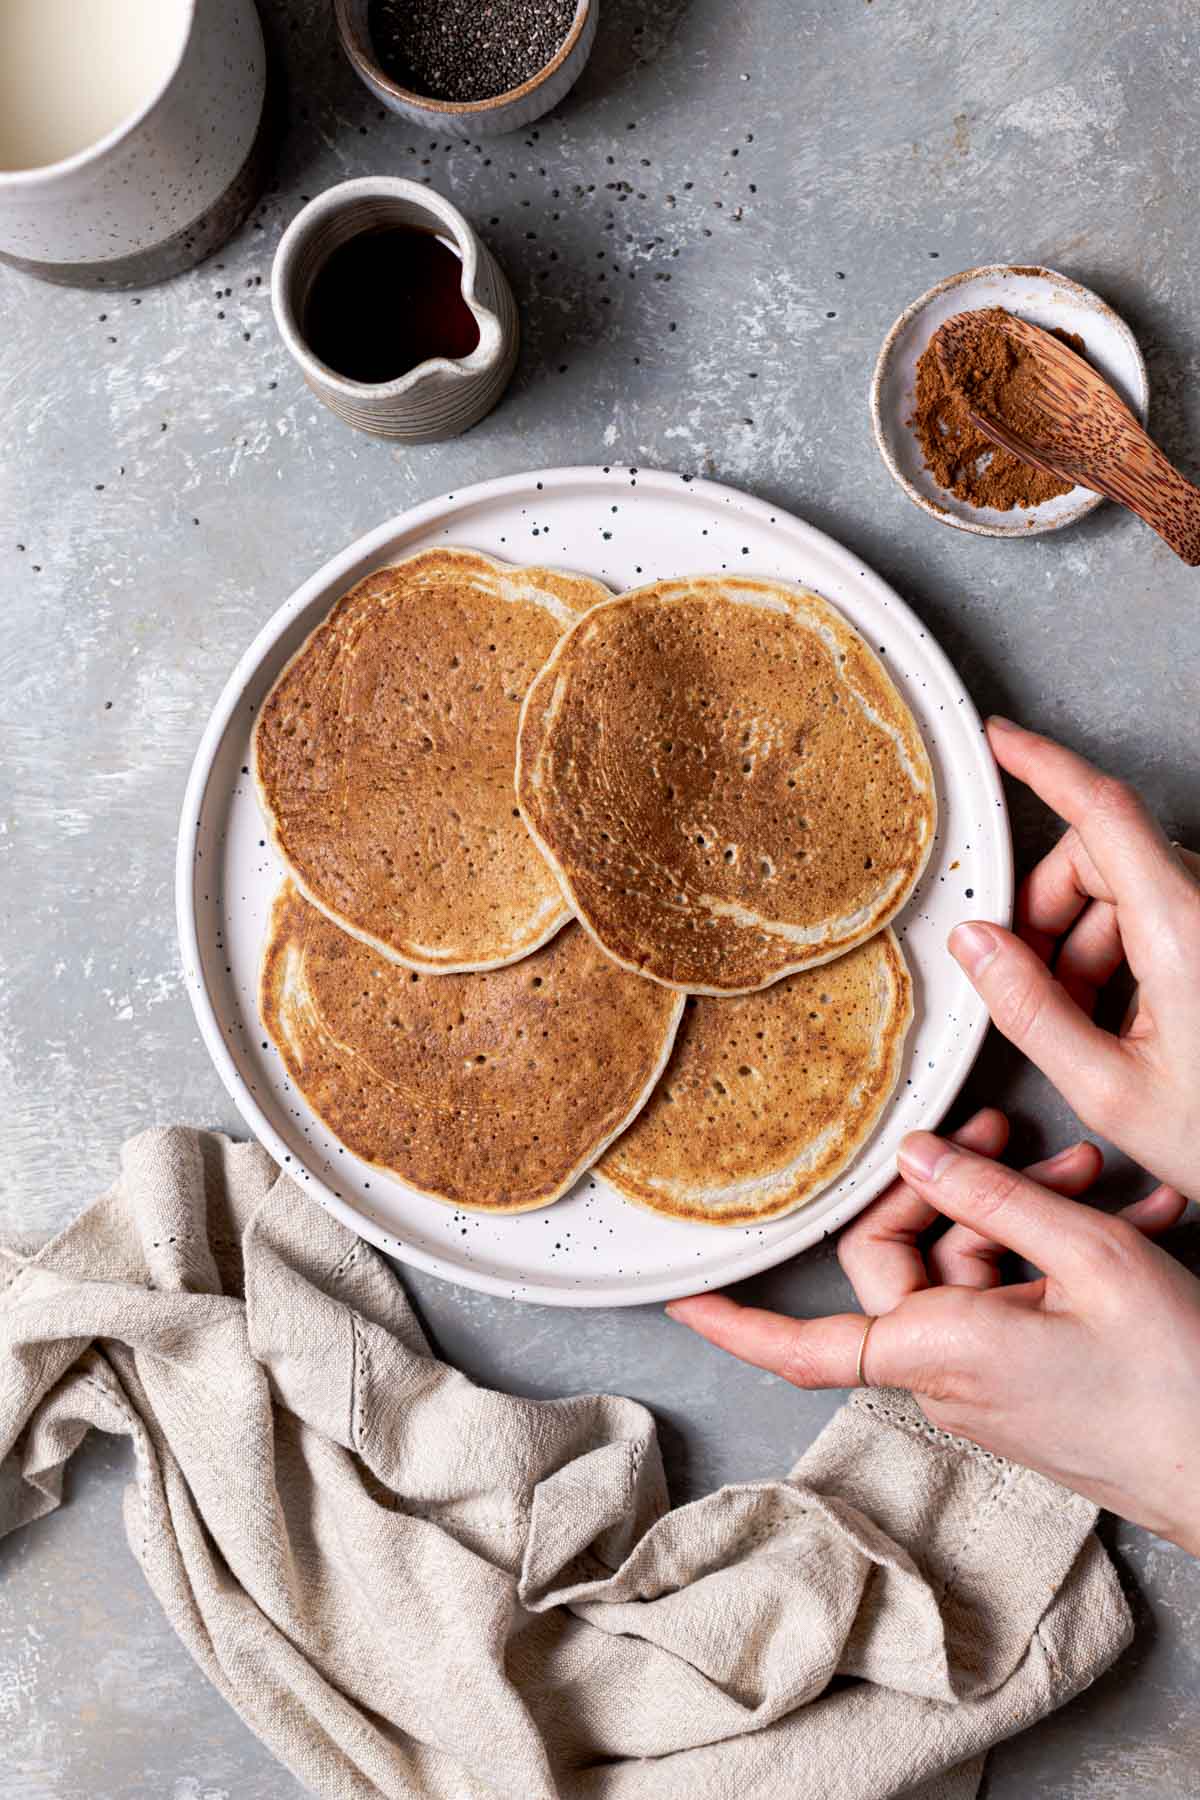 Plate with 4 pancakes on it and hands reaching towards it.